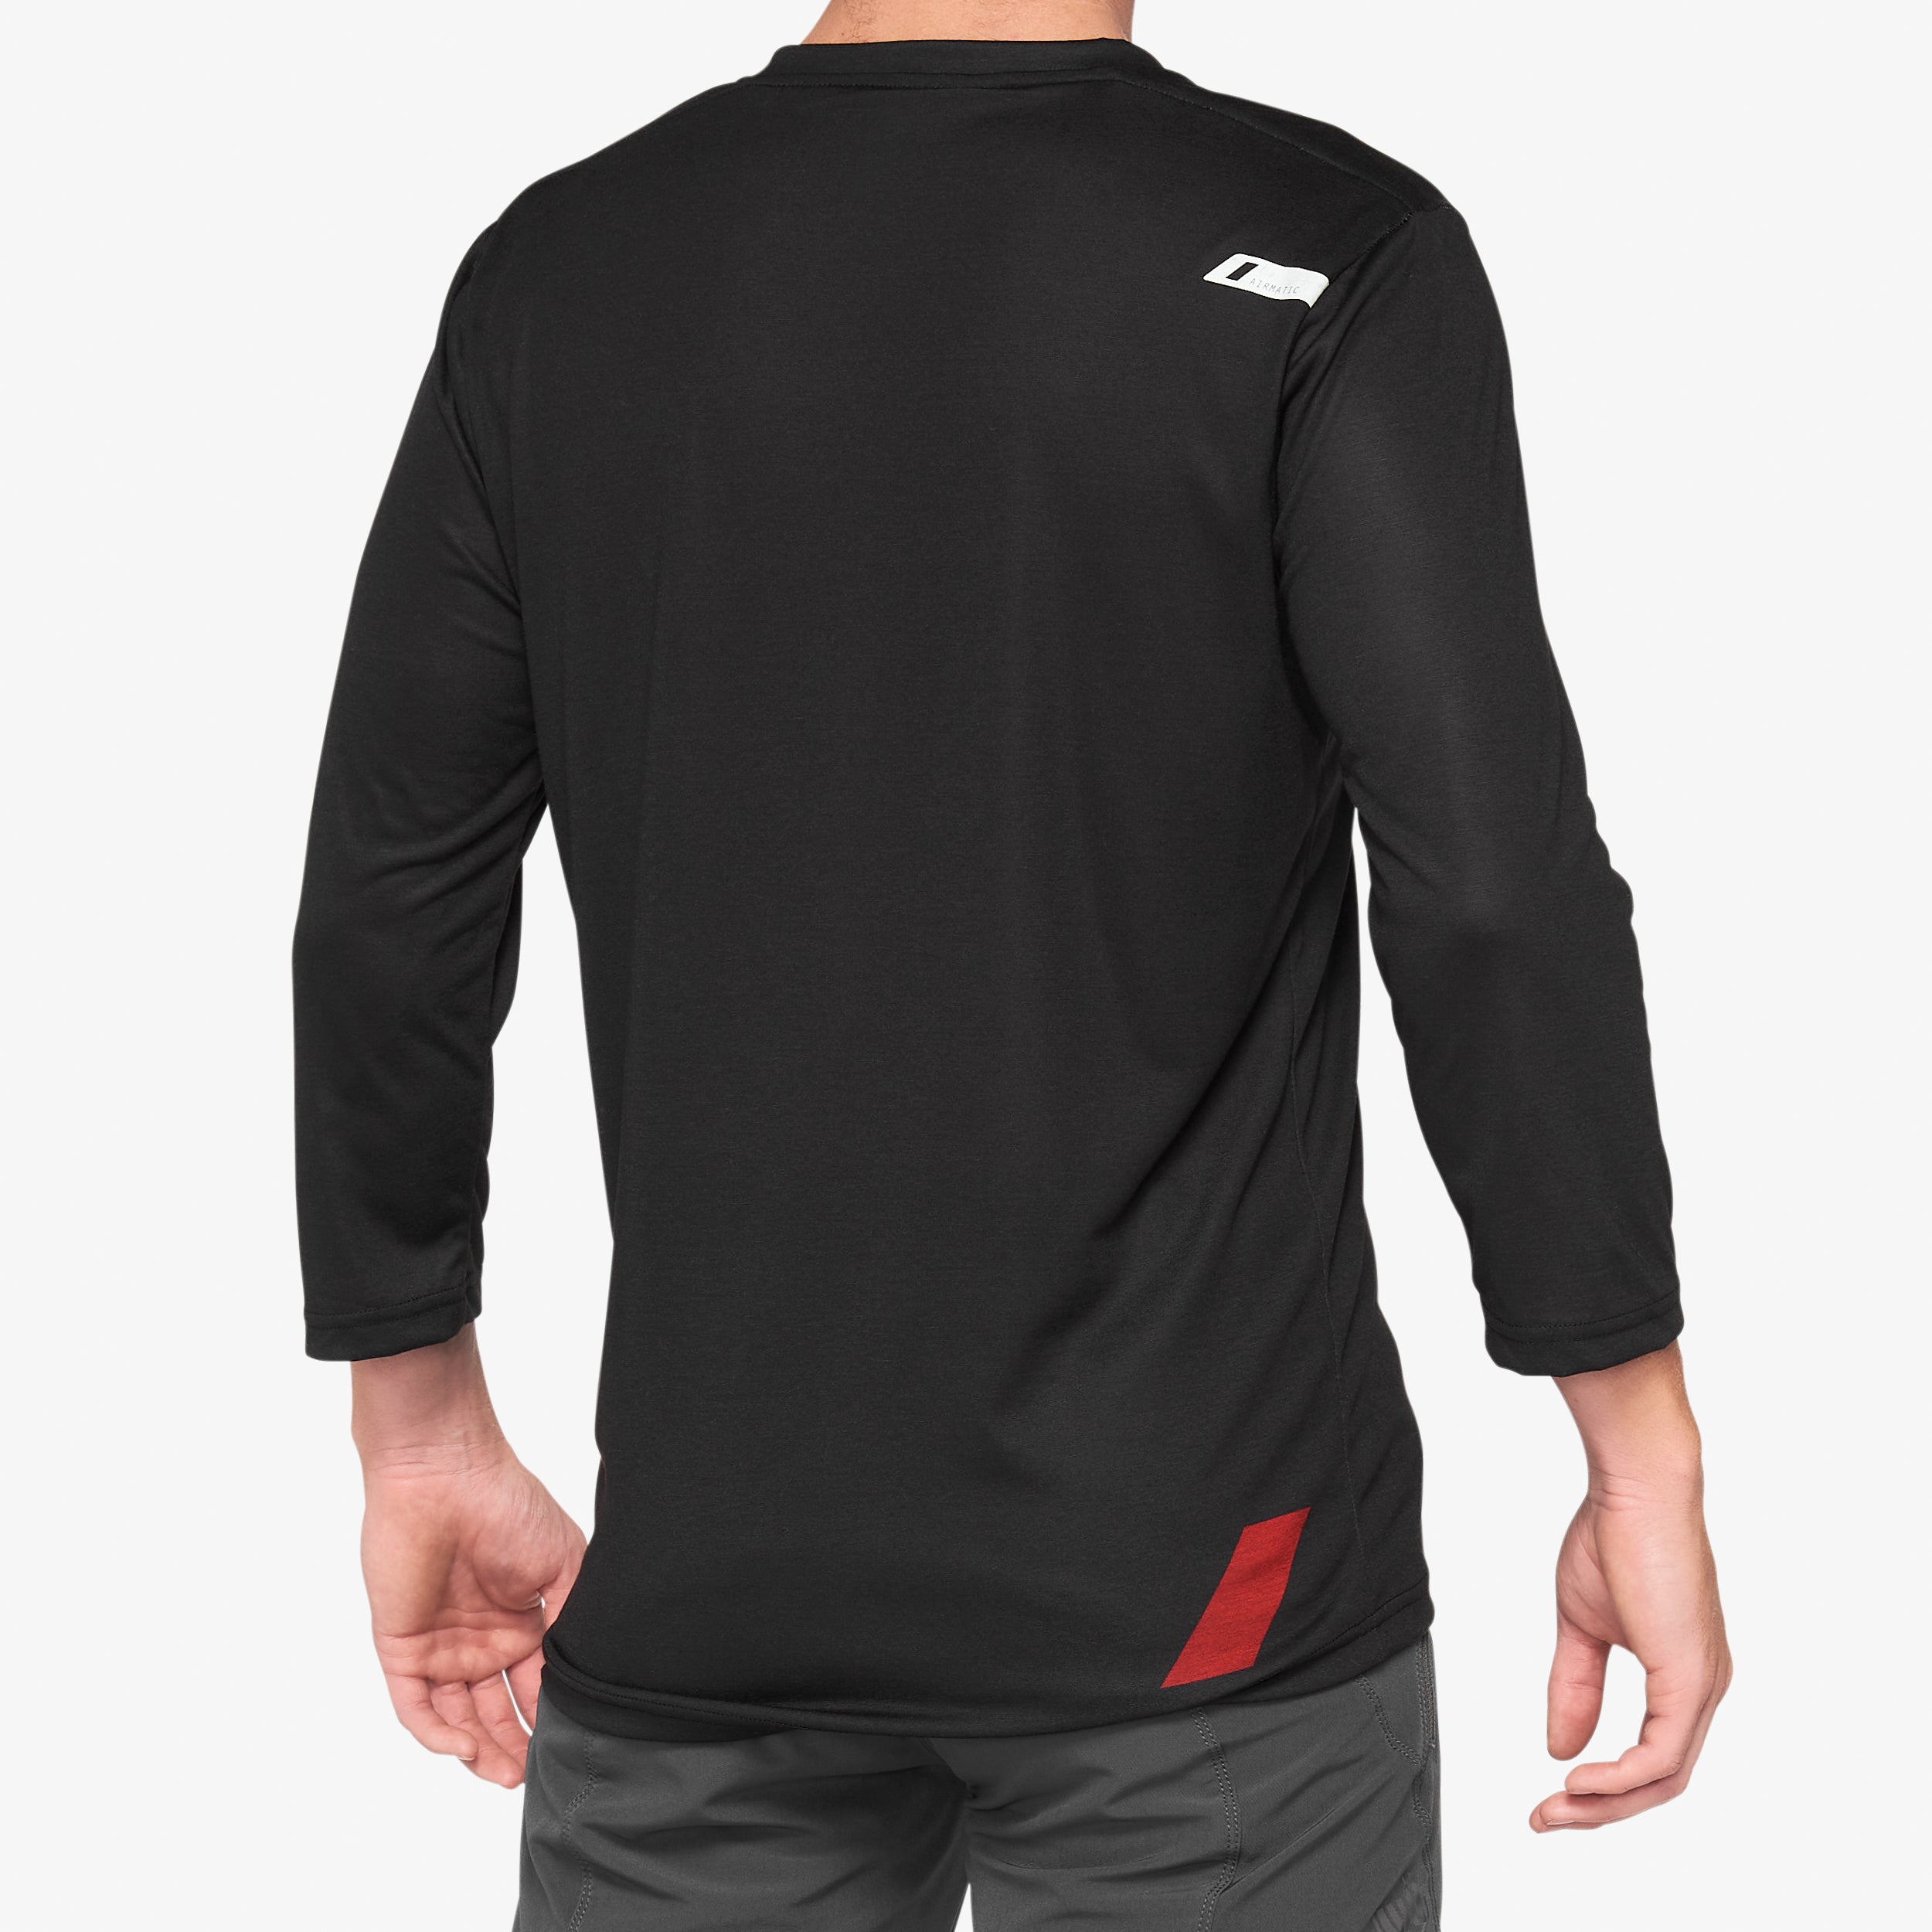 AIRMATIC 3/4 Sleeve Jersey Black/Red - Secondary